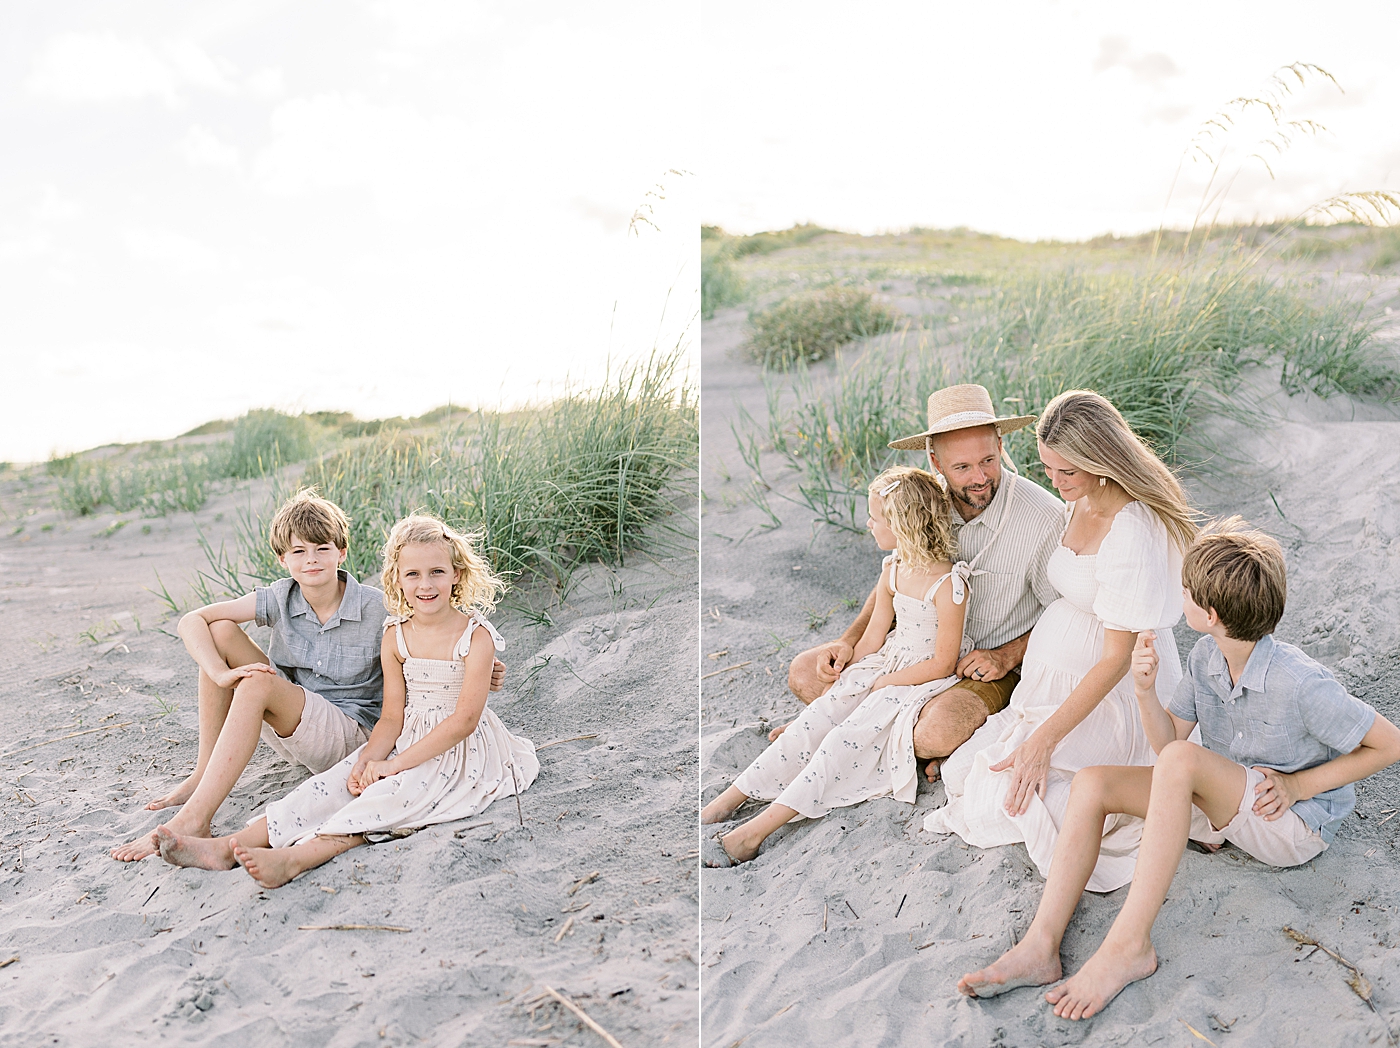 Little boy and girl sitting on the beach together | Image by Caitlyn Motycka